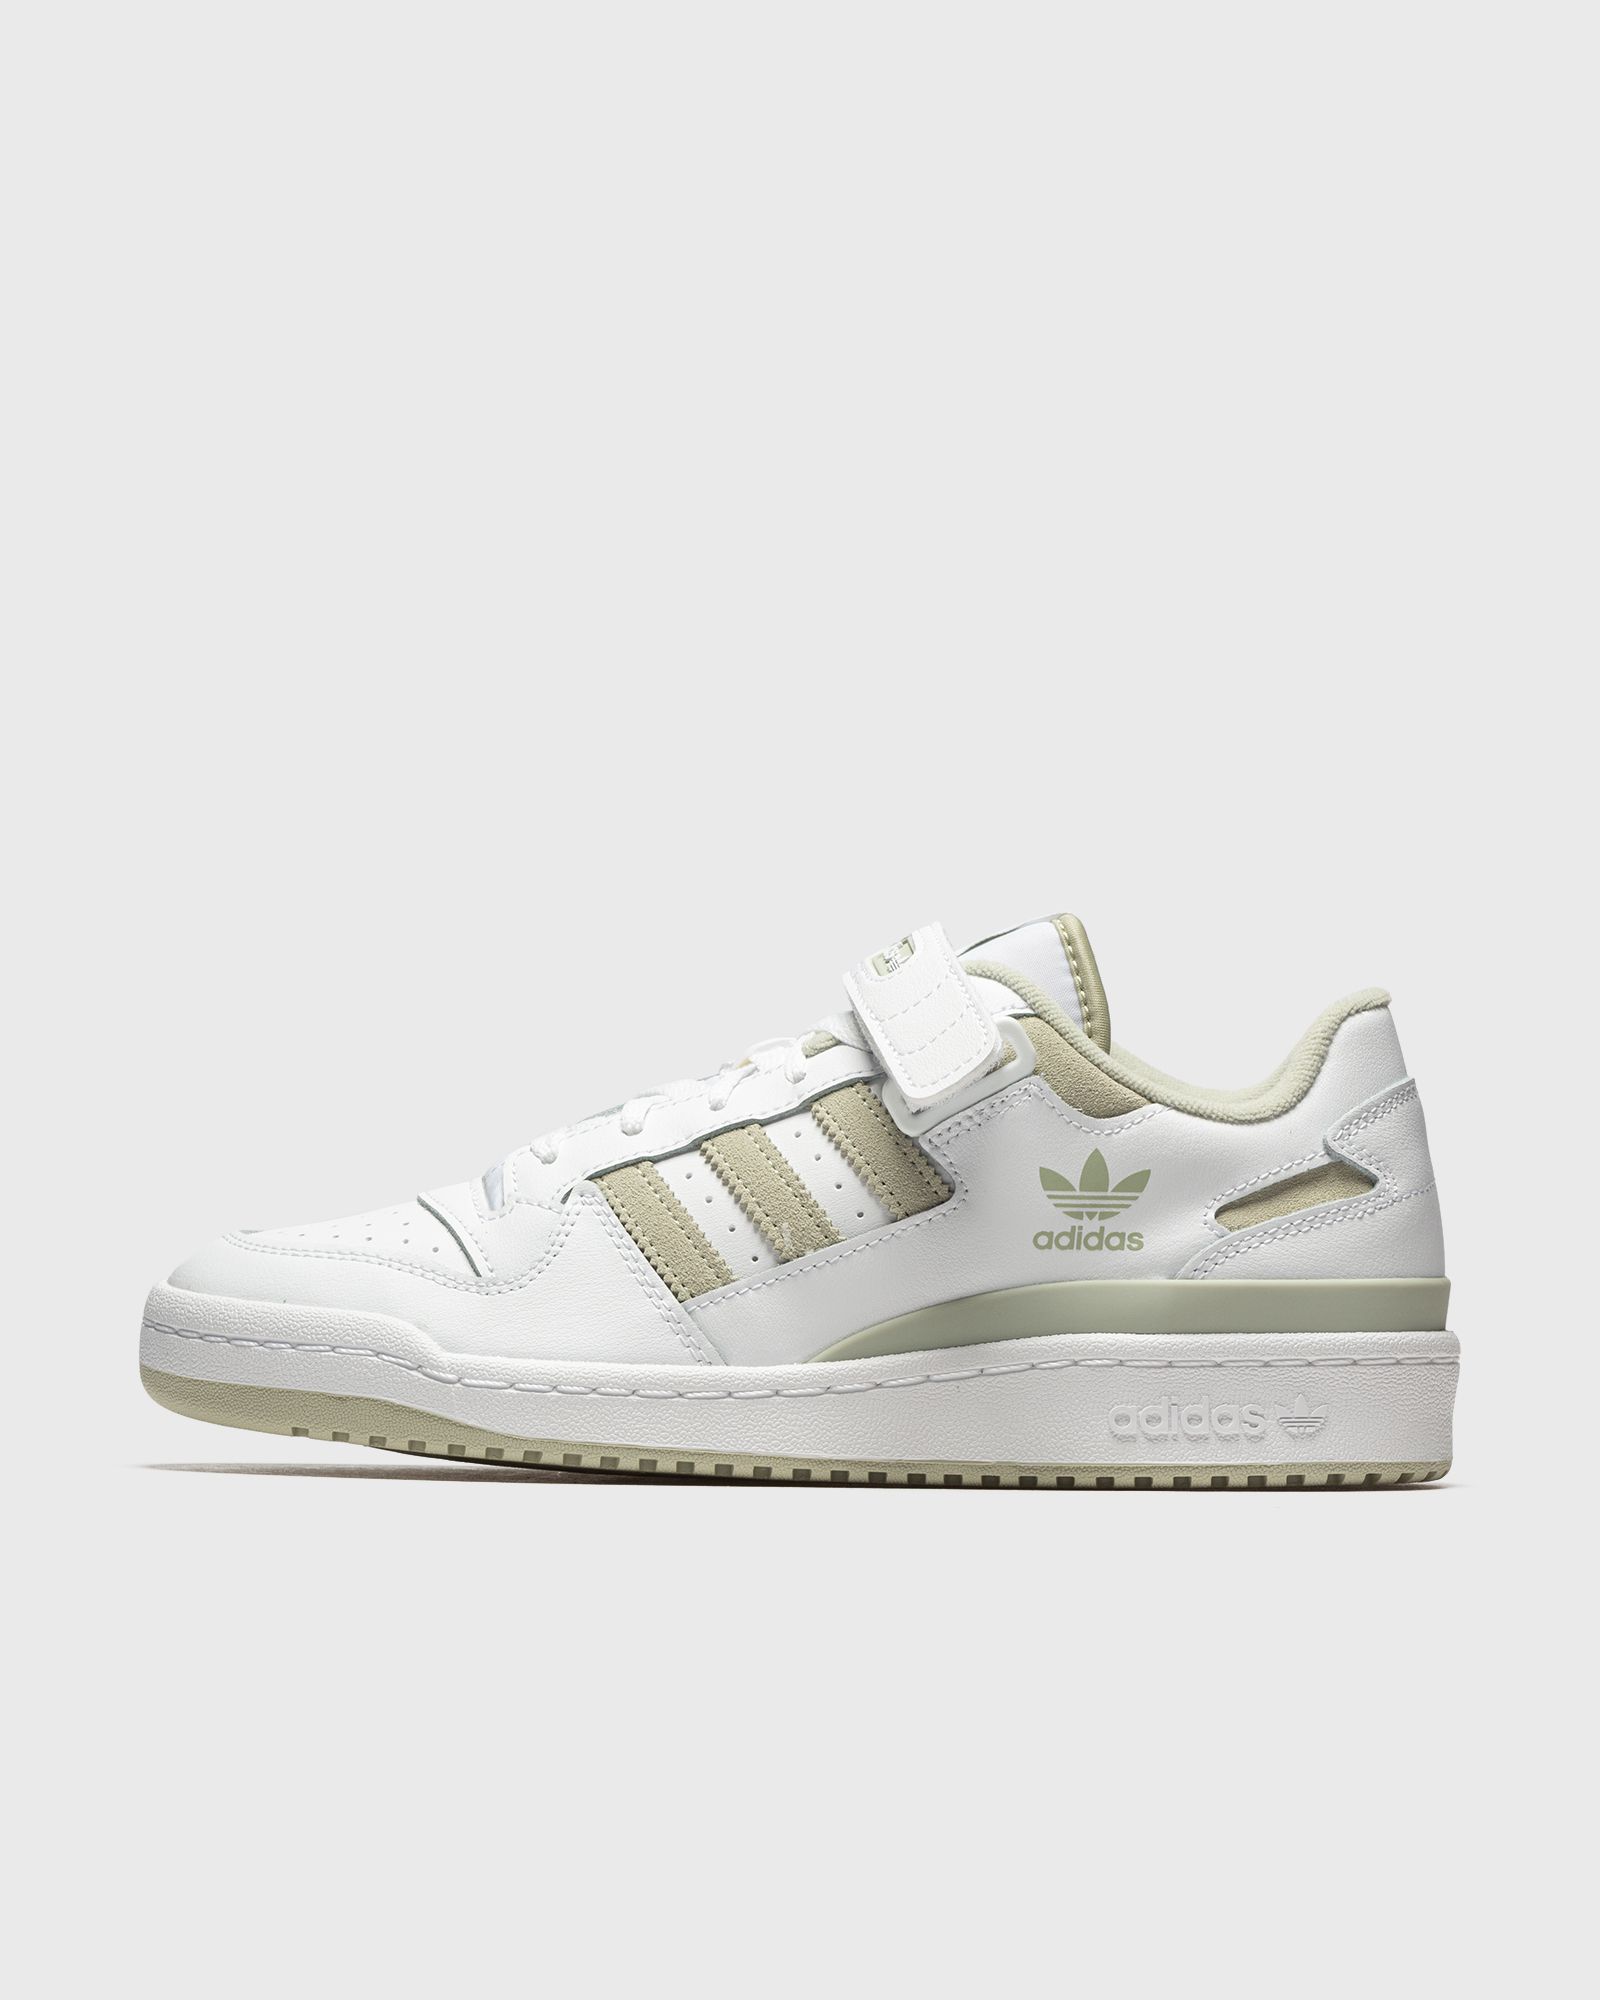 mave skandale Fuld BSTN - US for Adidas FORUM LOW FTWWHT/HALGRN/FTWWHT men,women Sneakers now  available at BSTN in size US 11,0 | AccuWeather Shop